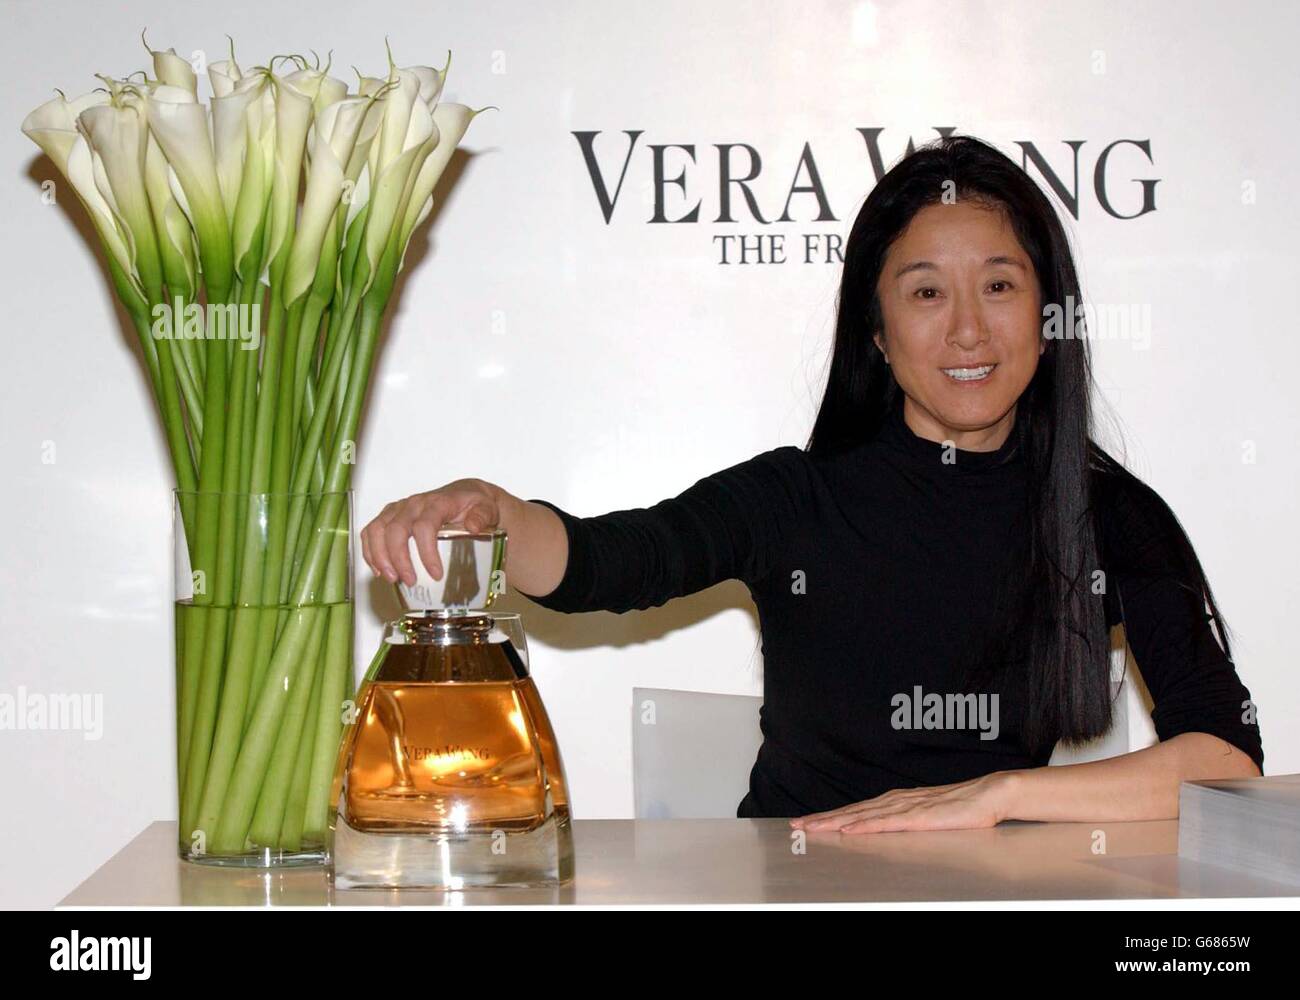 Fashion designer Vera Wang unveils her first signature fragrance at Harrods in west London. Known for her modern bridal and evening wear, Vera's fragrance will be exclusively available at Harrods. Stock Photo